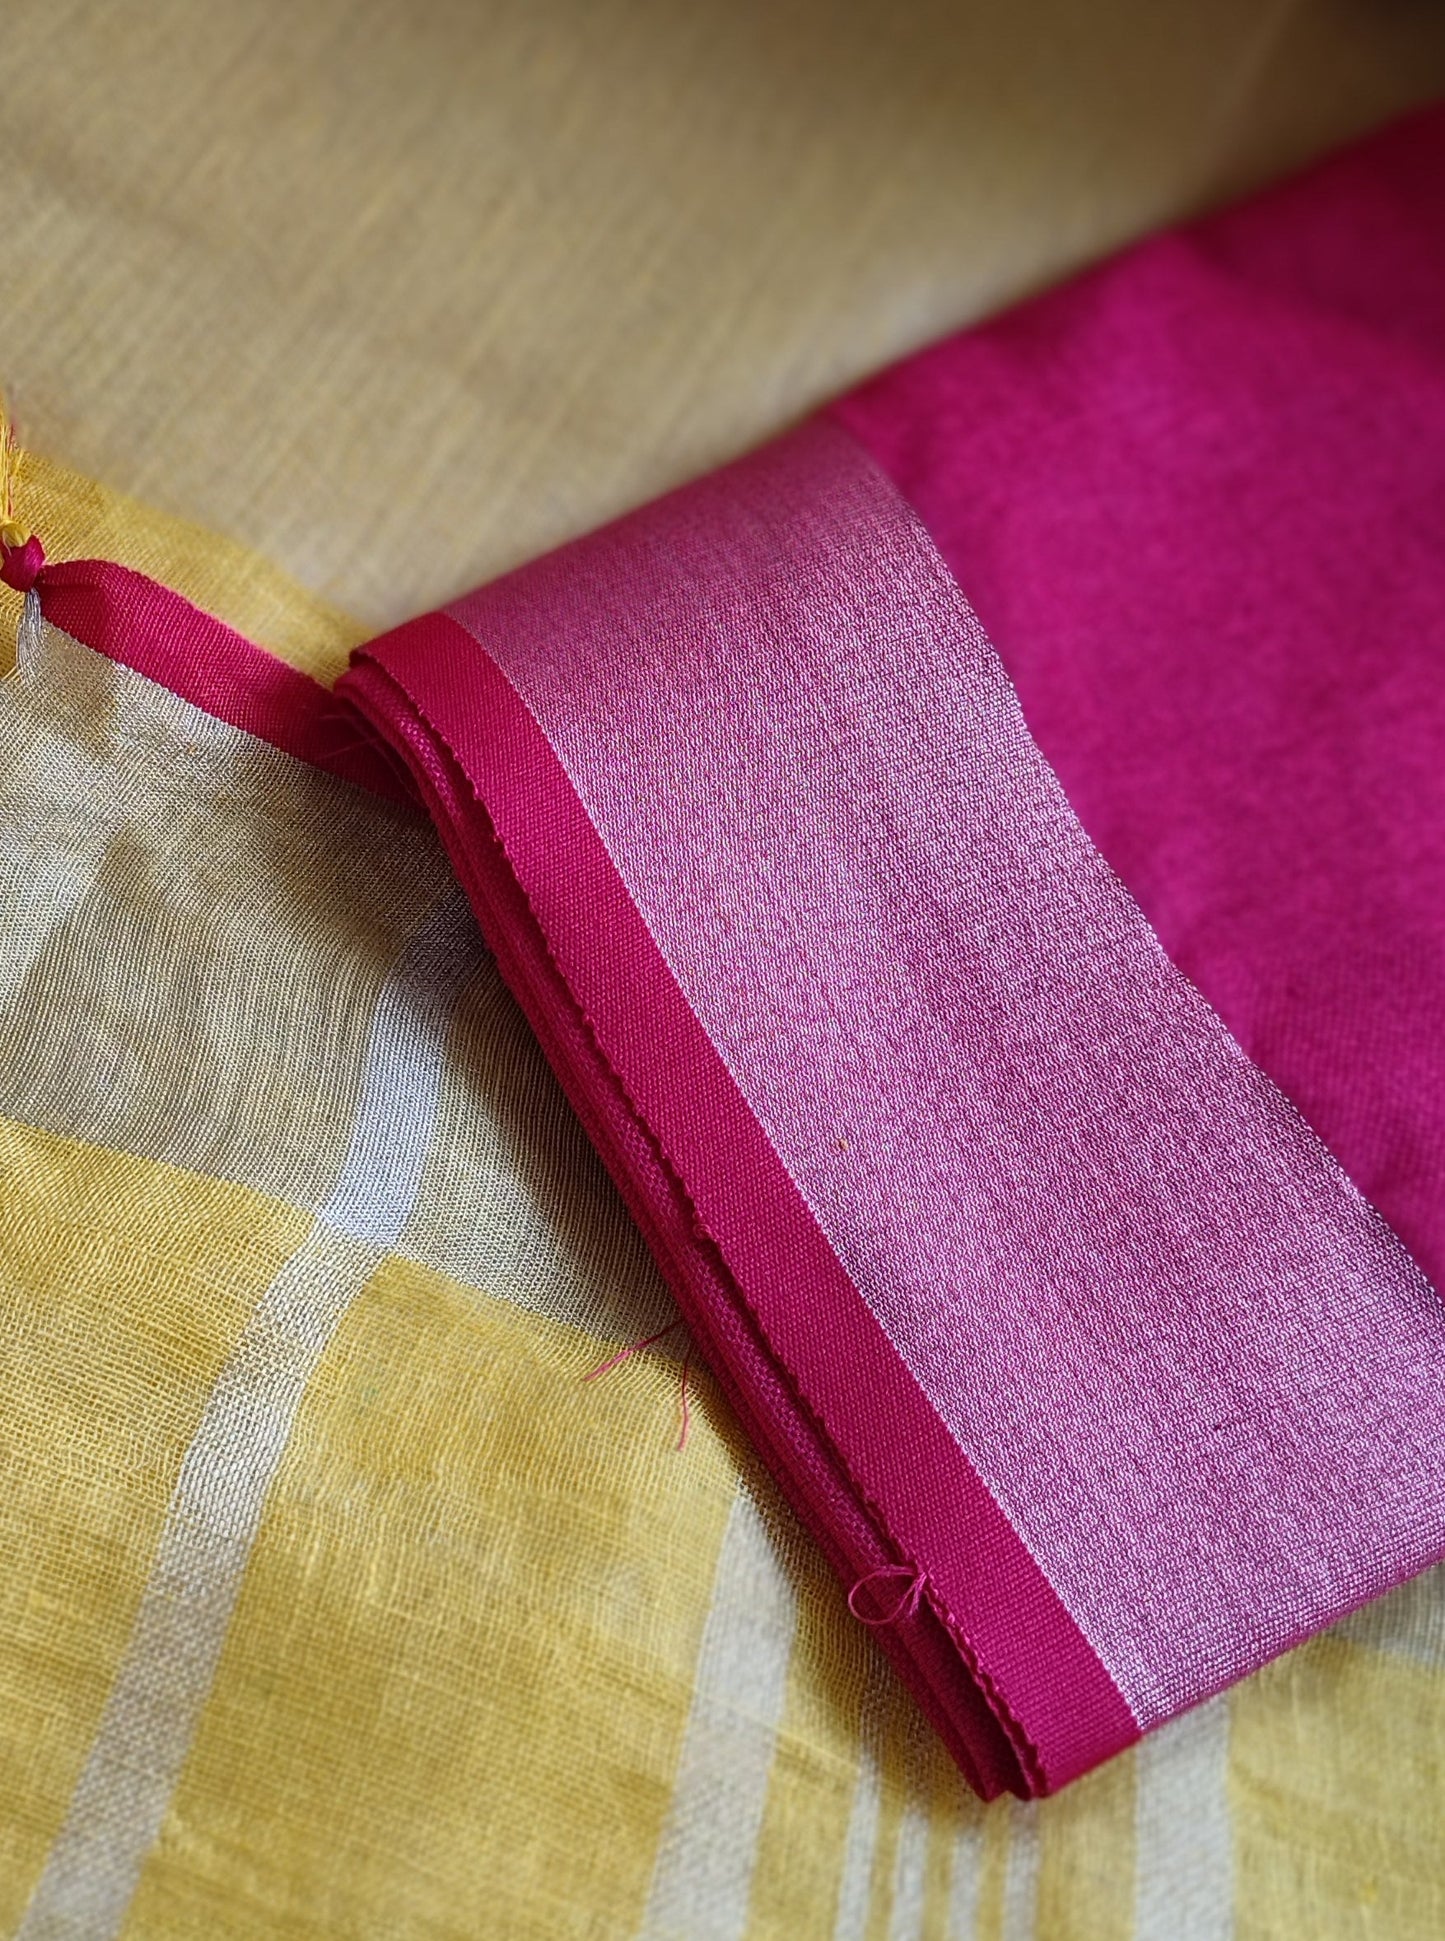 Lemon Yellow Pure Linen Embroidered Saree with Tassels Detailing and Hot Pink Blouse